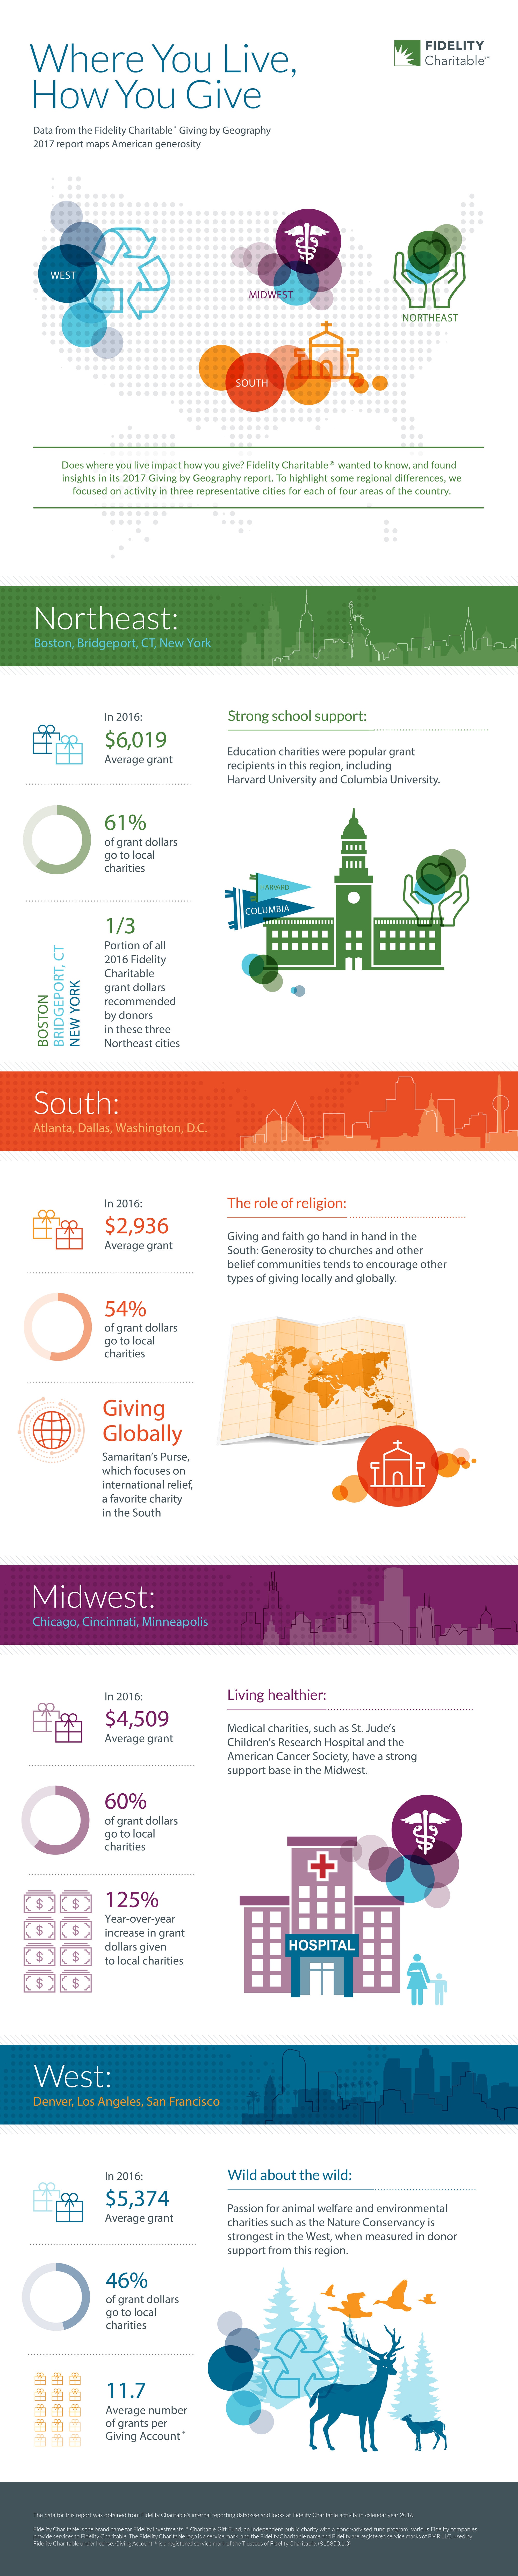 Our infographic provides a visual tour of regional charitable giving trends across the United States.